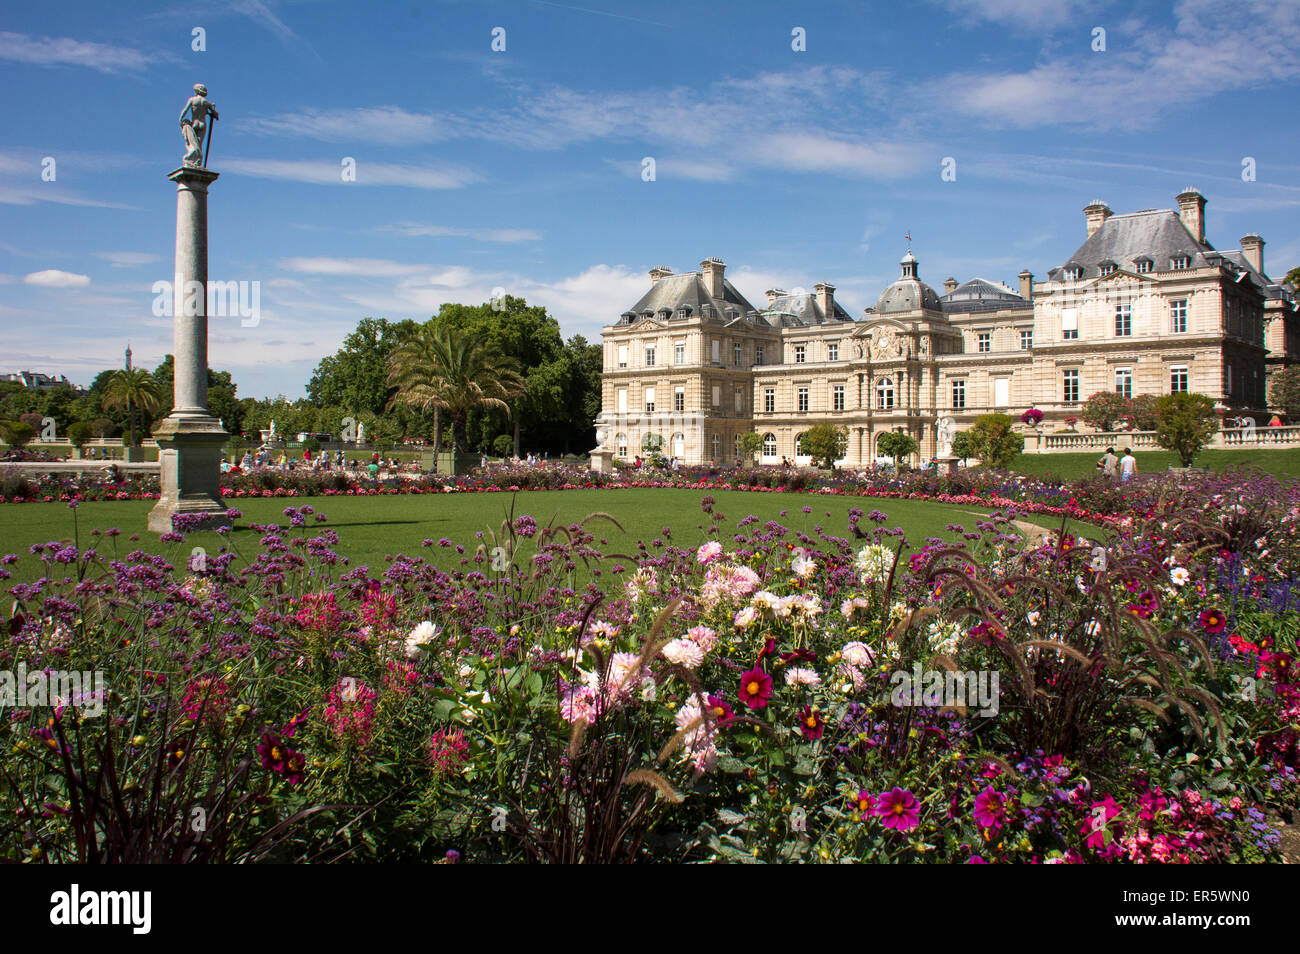 Garden, Jardin du Luxembourg with Palais du Luxembourg in the background, Paris, France, Europe Stock Photo